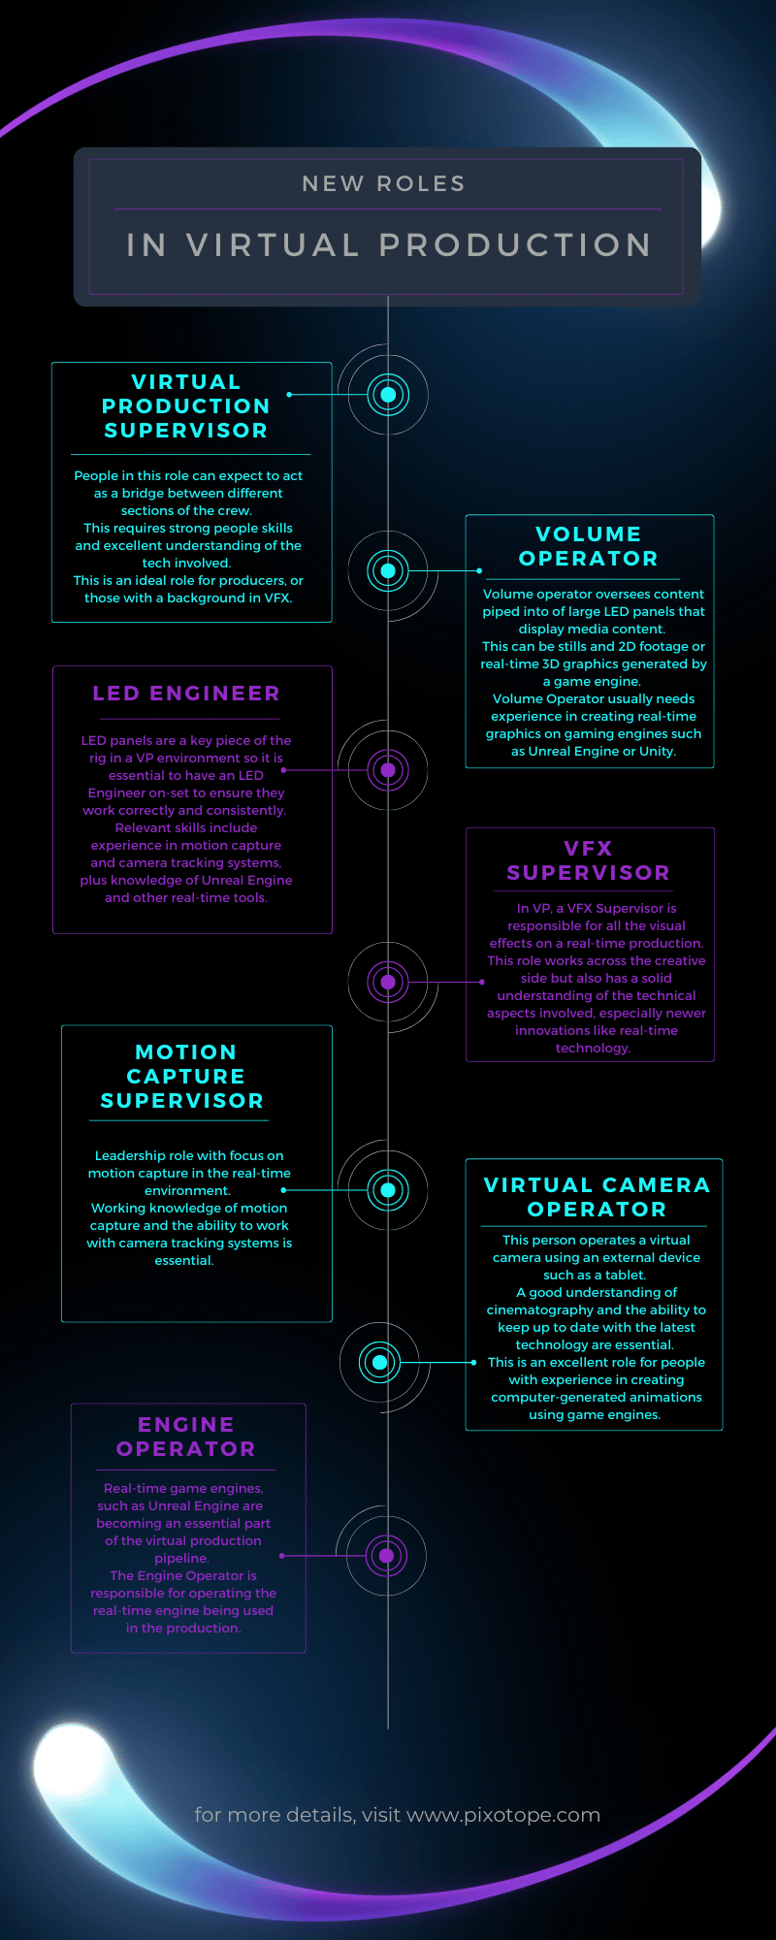 New roles in virtual production